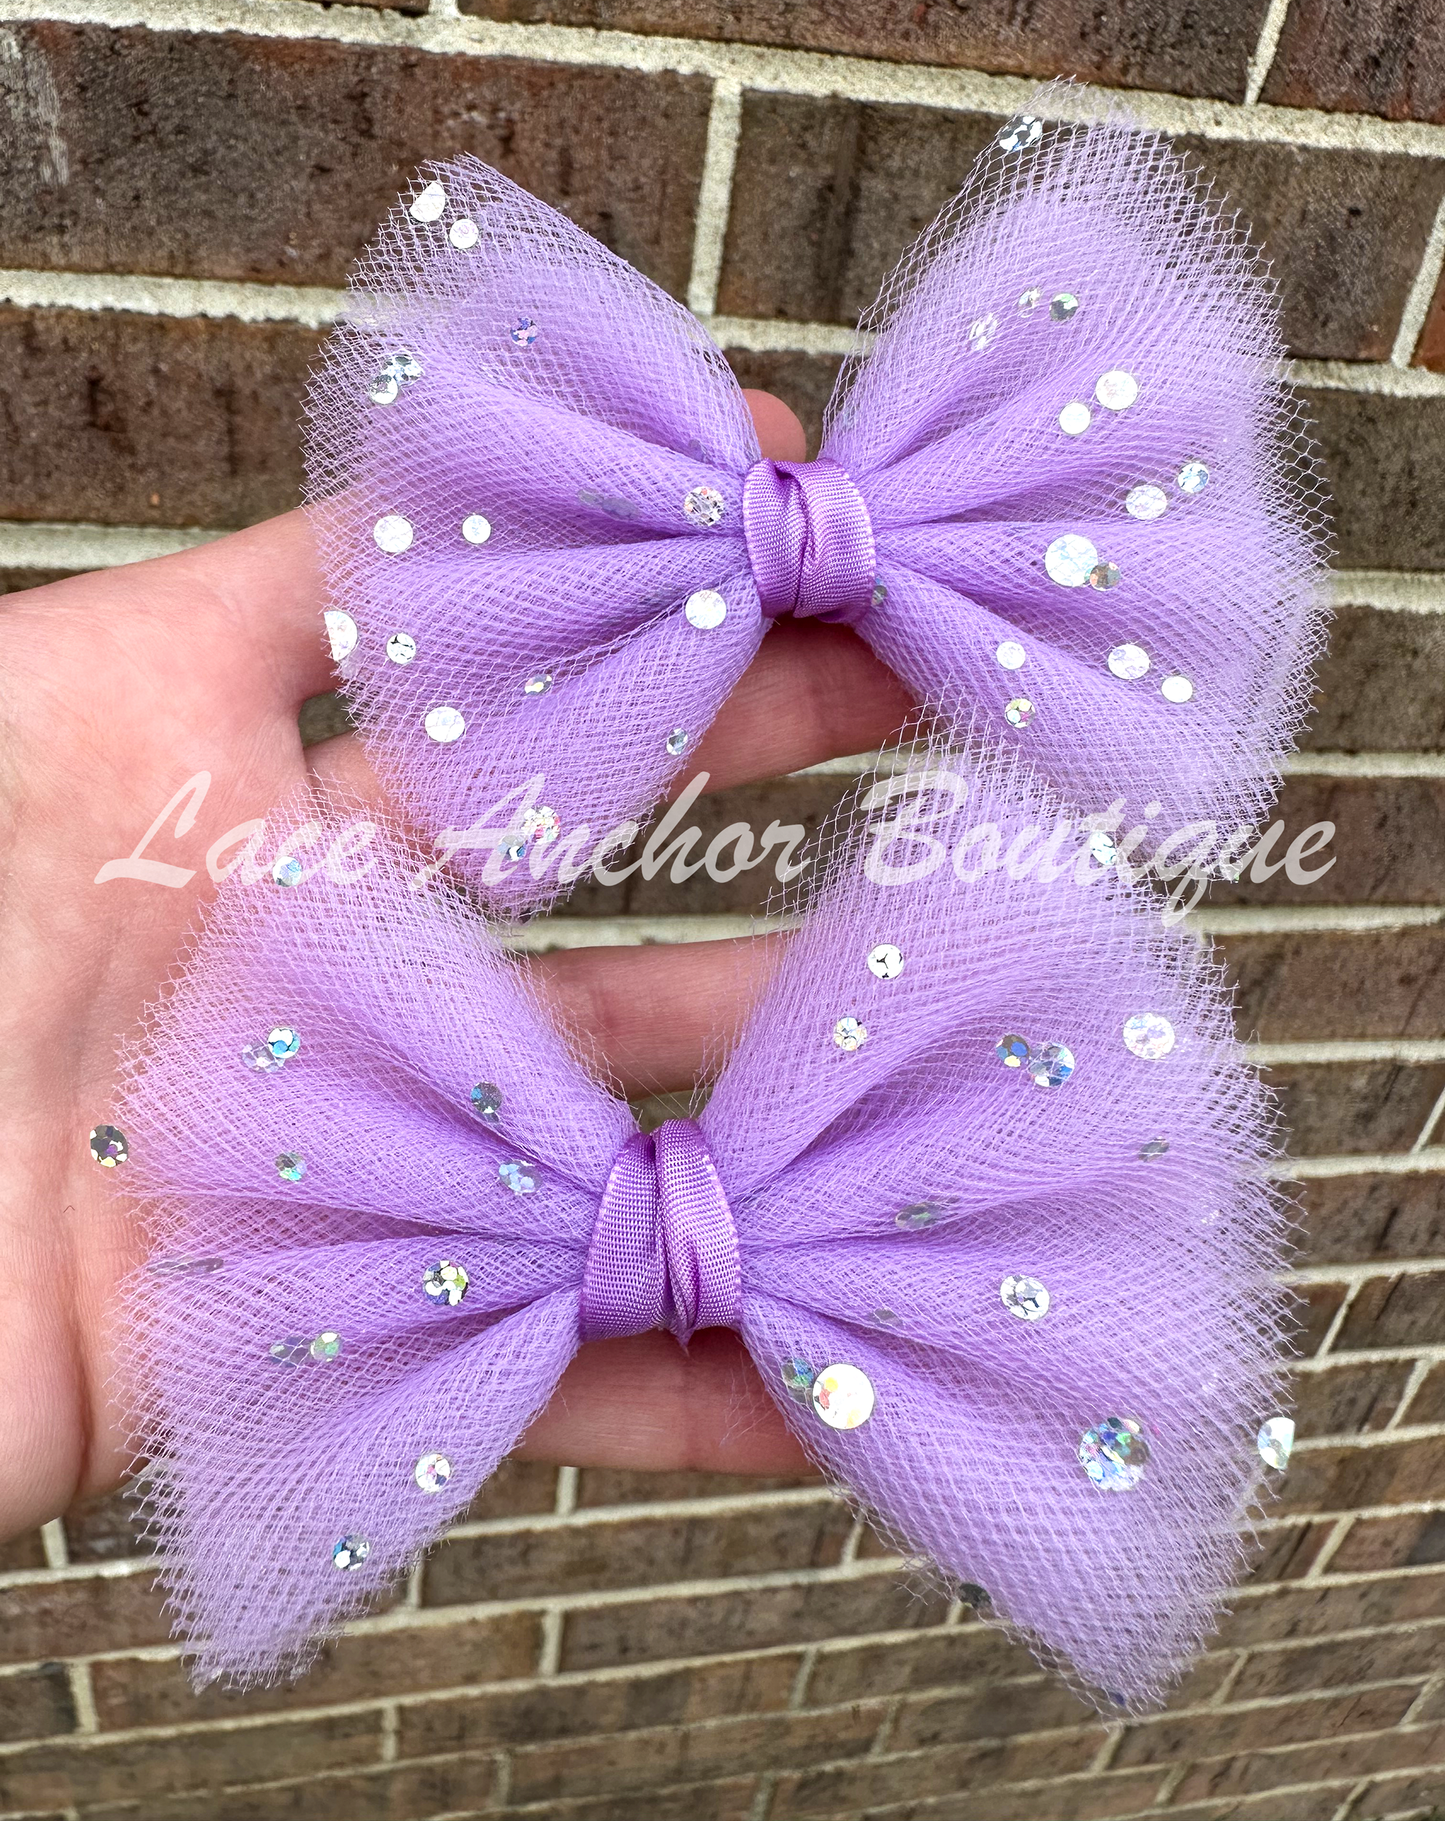 handmade custom tulle girls hair bow or piggies clips with silver squin sparkles and glitter in lilac light purple.